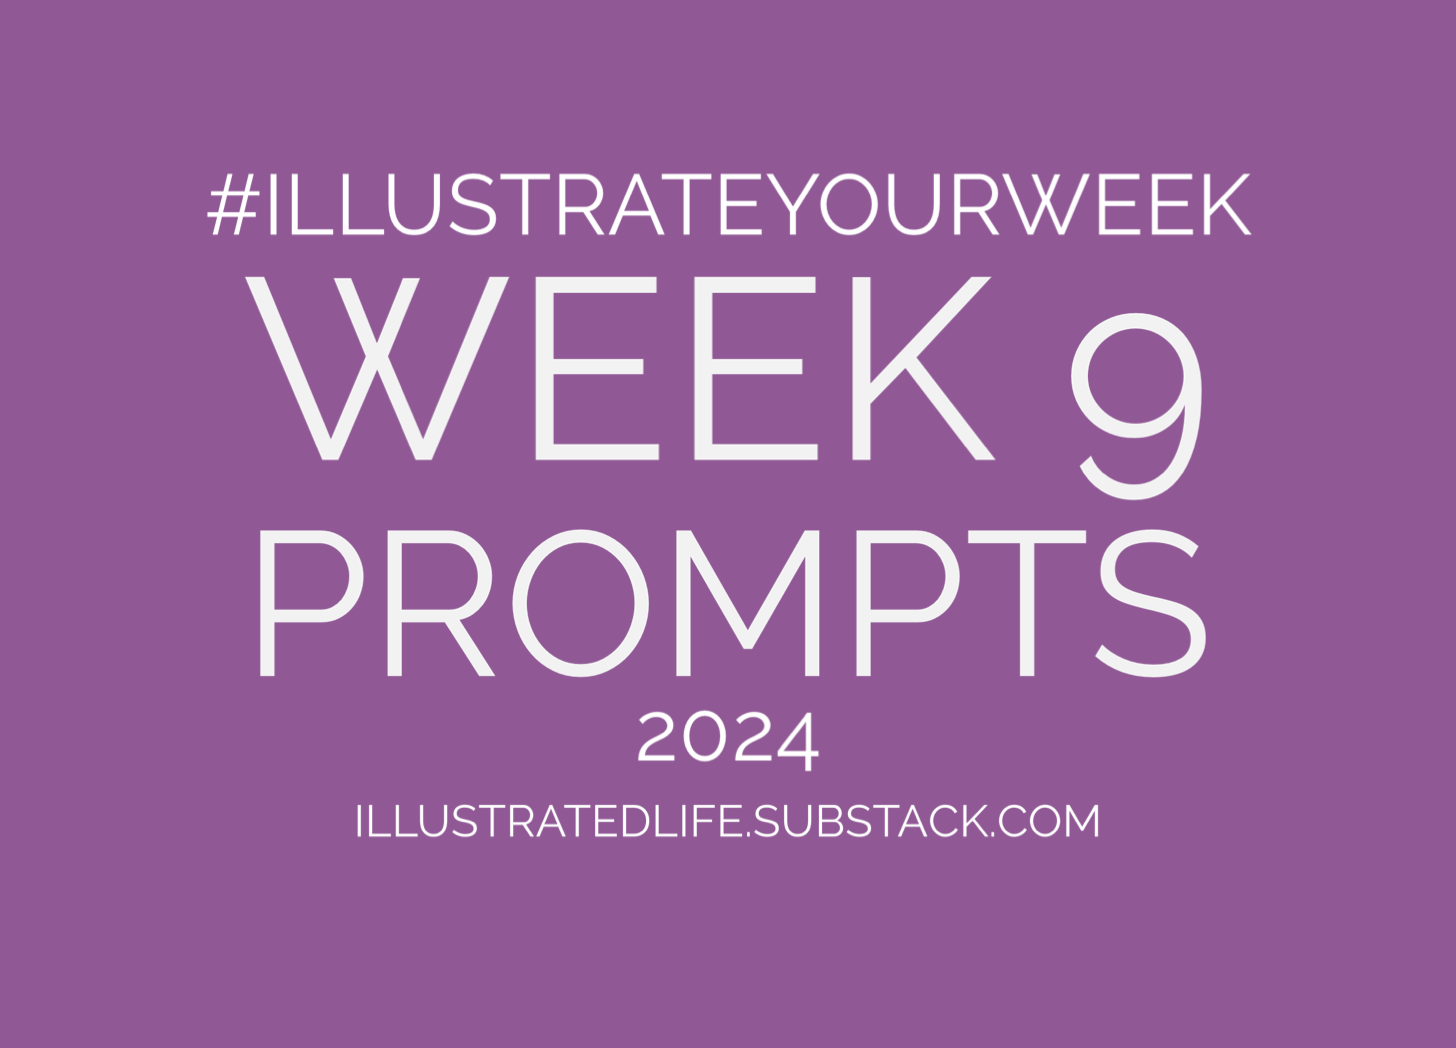 Week 9 Prompts for Illustrate Your Week 2024